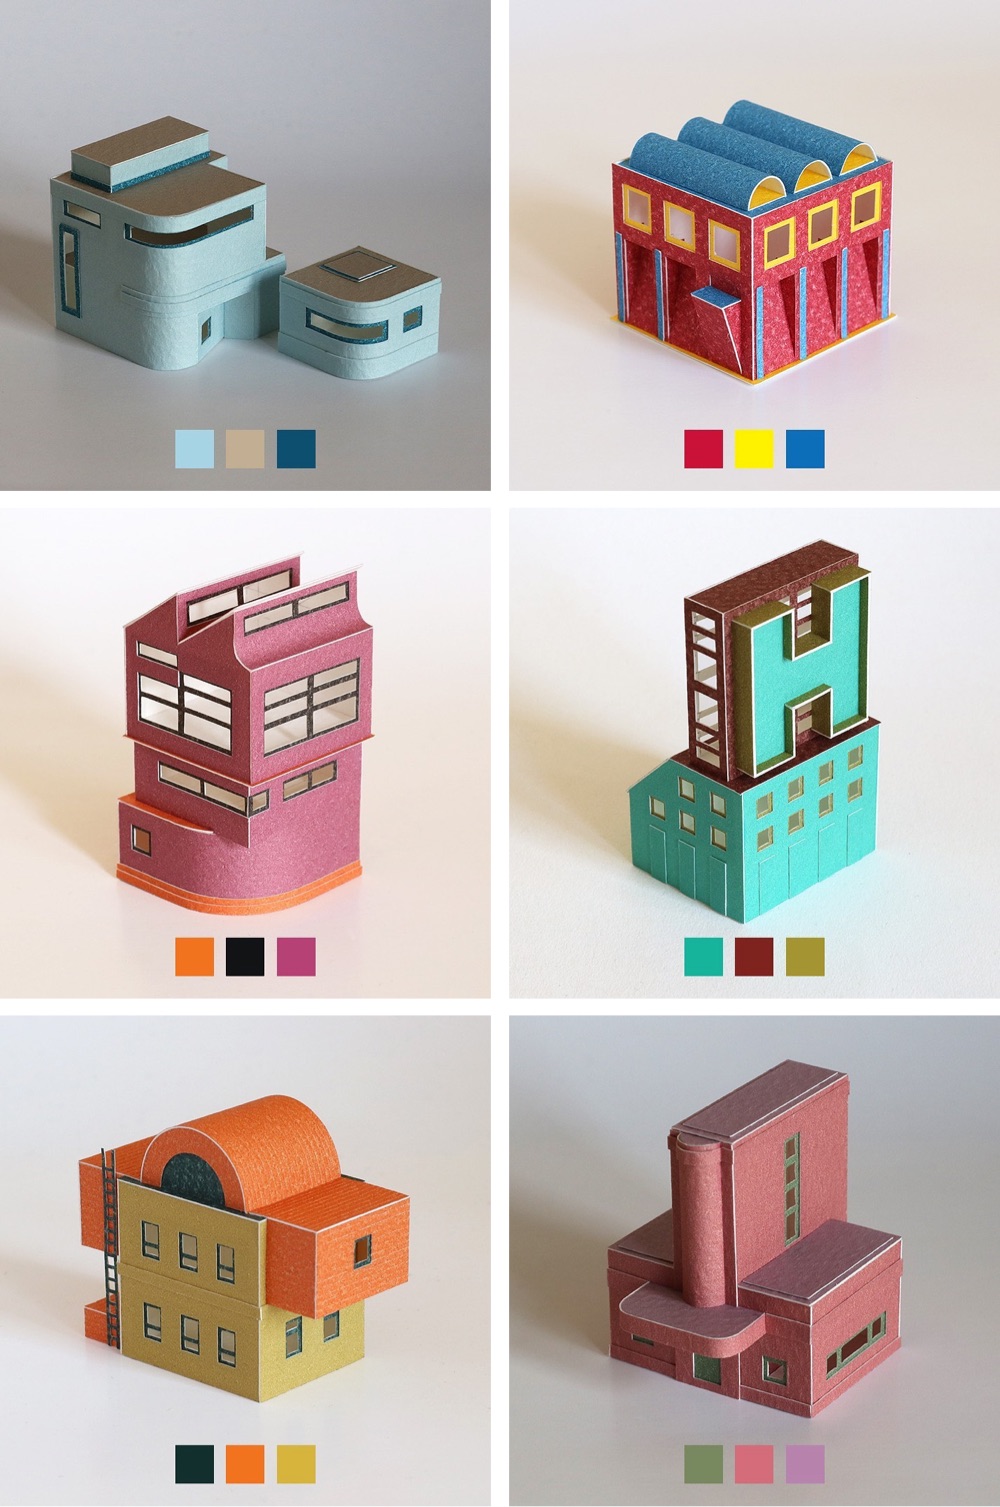 tidy papercraft houses each made using a palette of three to four colors